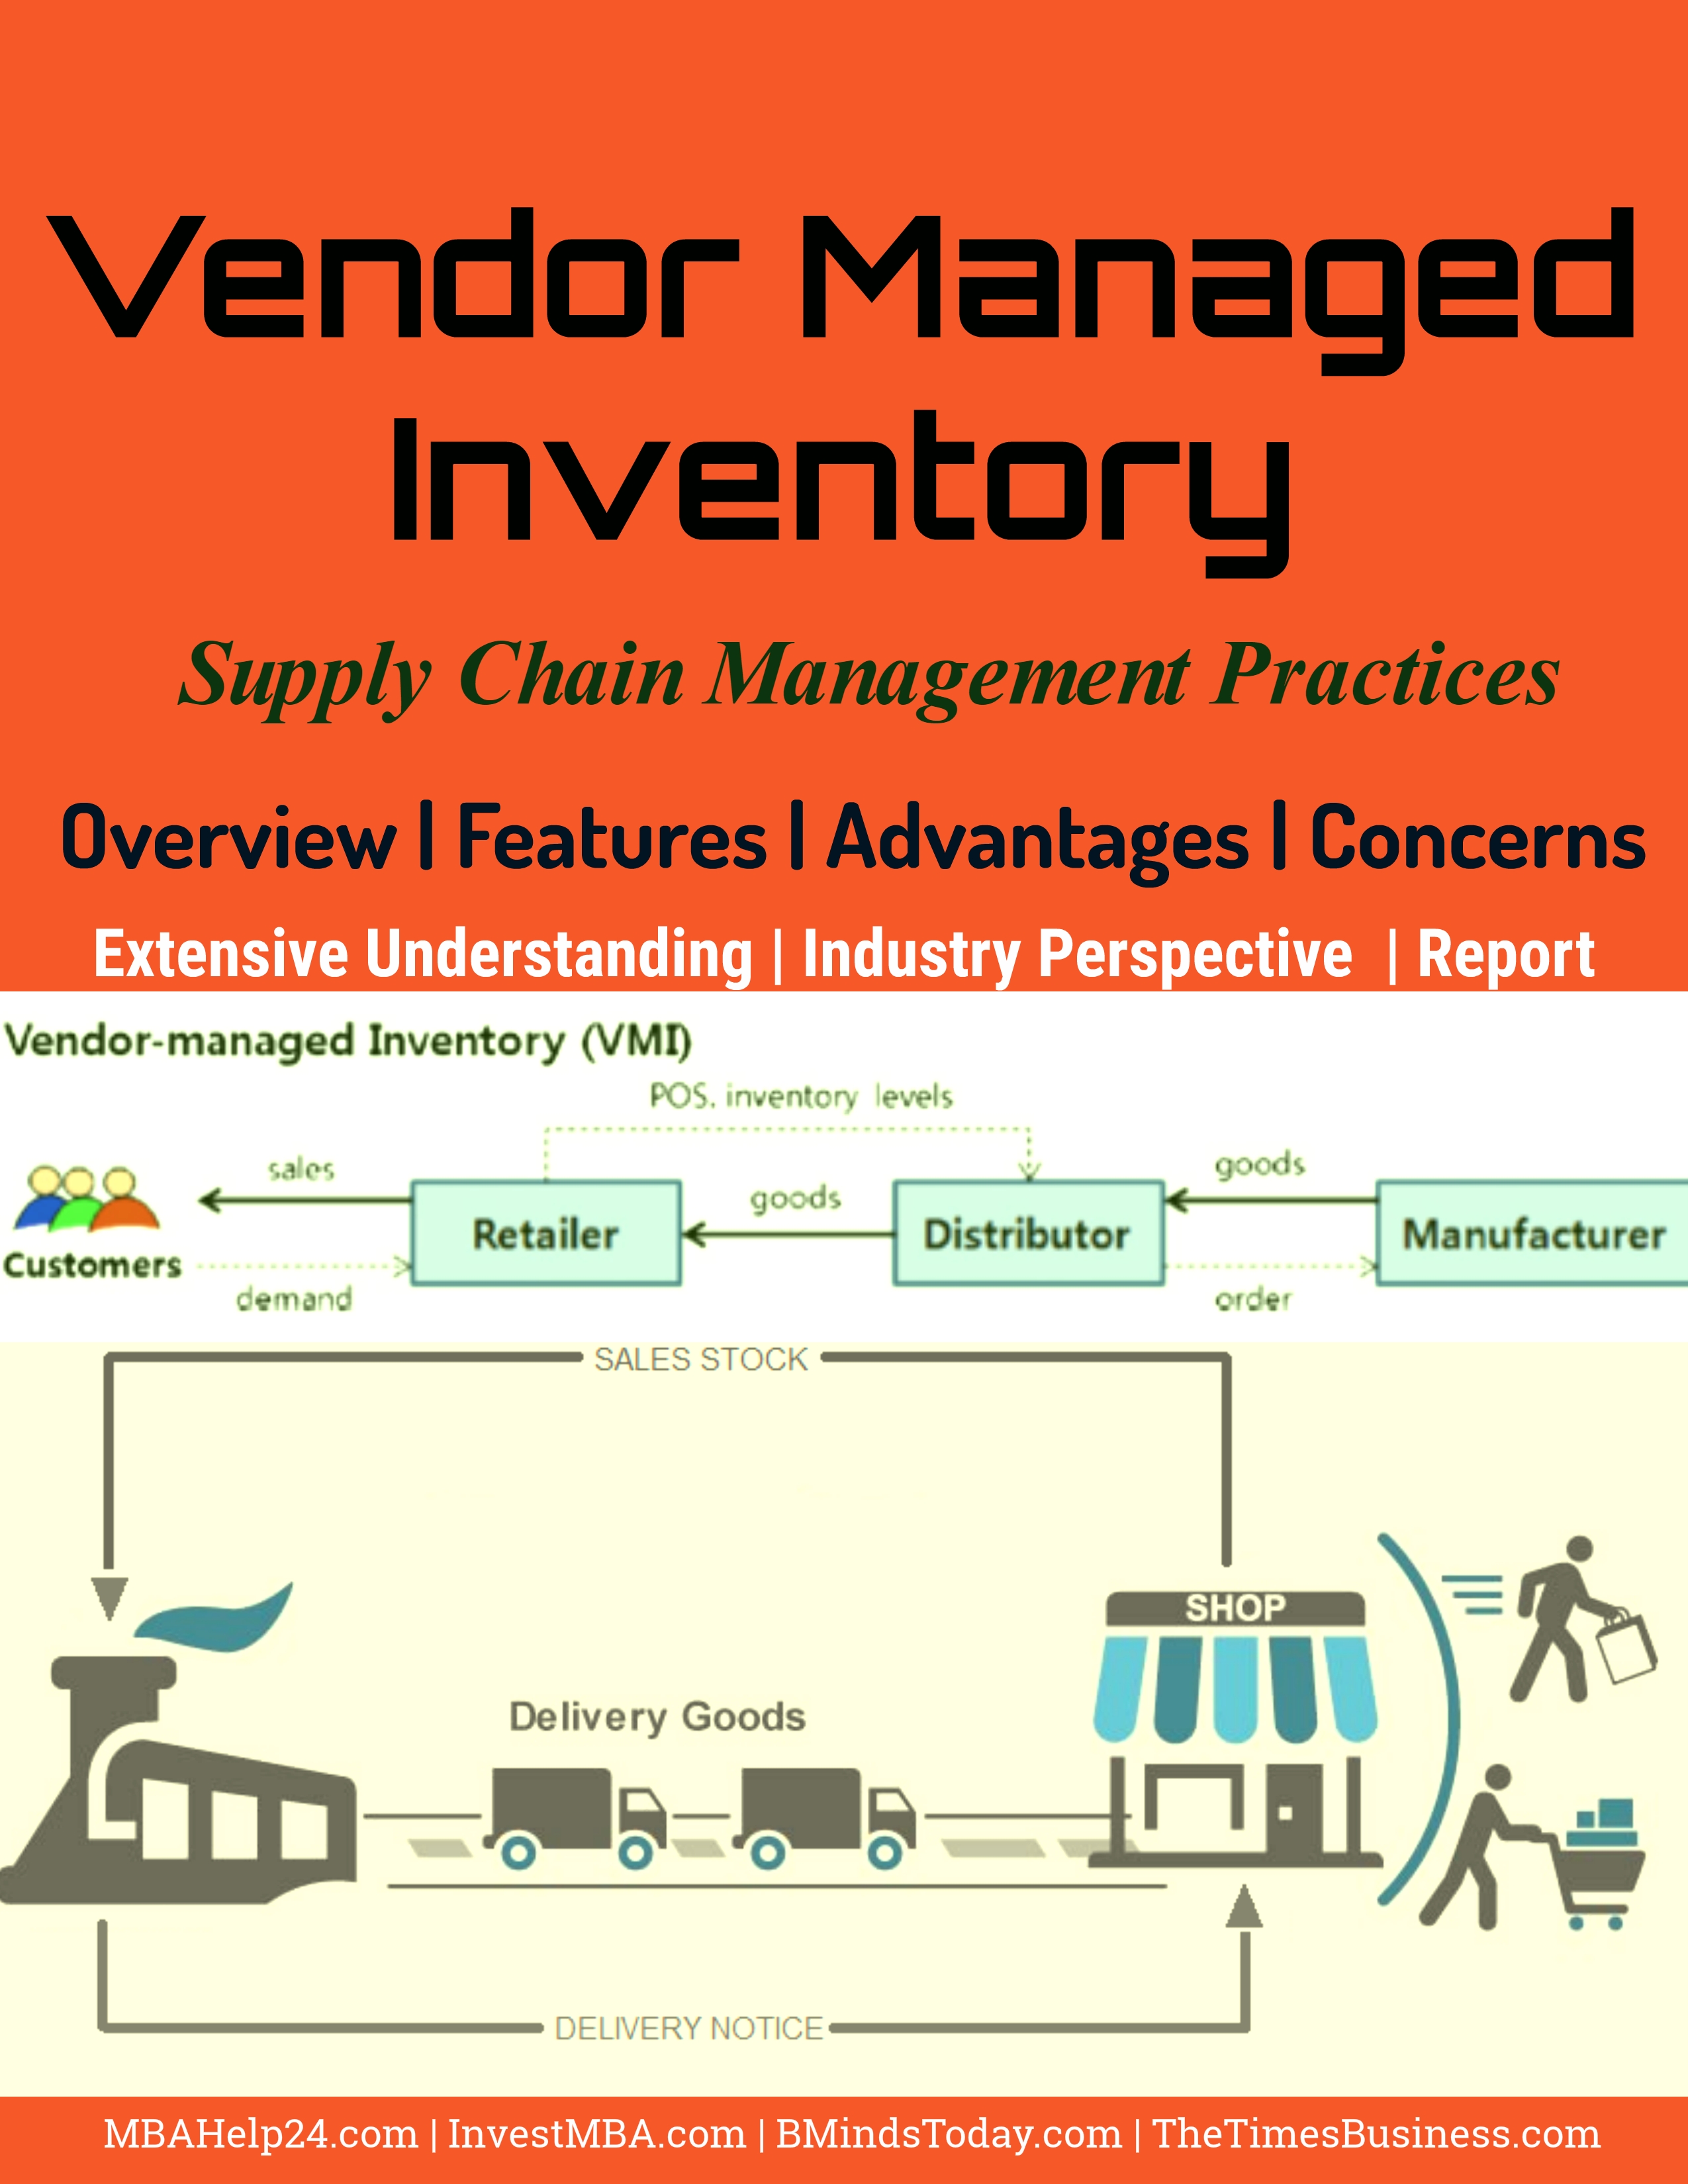 Vendor Managed Inventory- Overview, Features, Advantages and Concerns Vendor Managed Inventory Vendor Managed Inventory | Overview | Features | Advantages | Concerns Vendor Managed Inventory Overview Features Advantages and Concerns